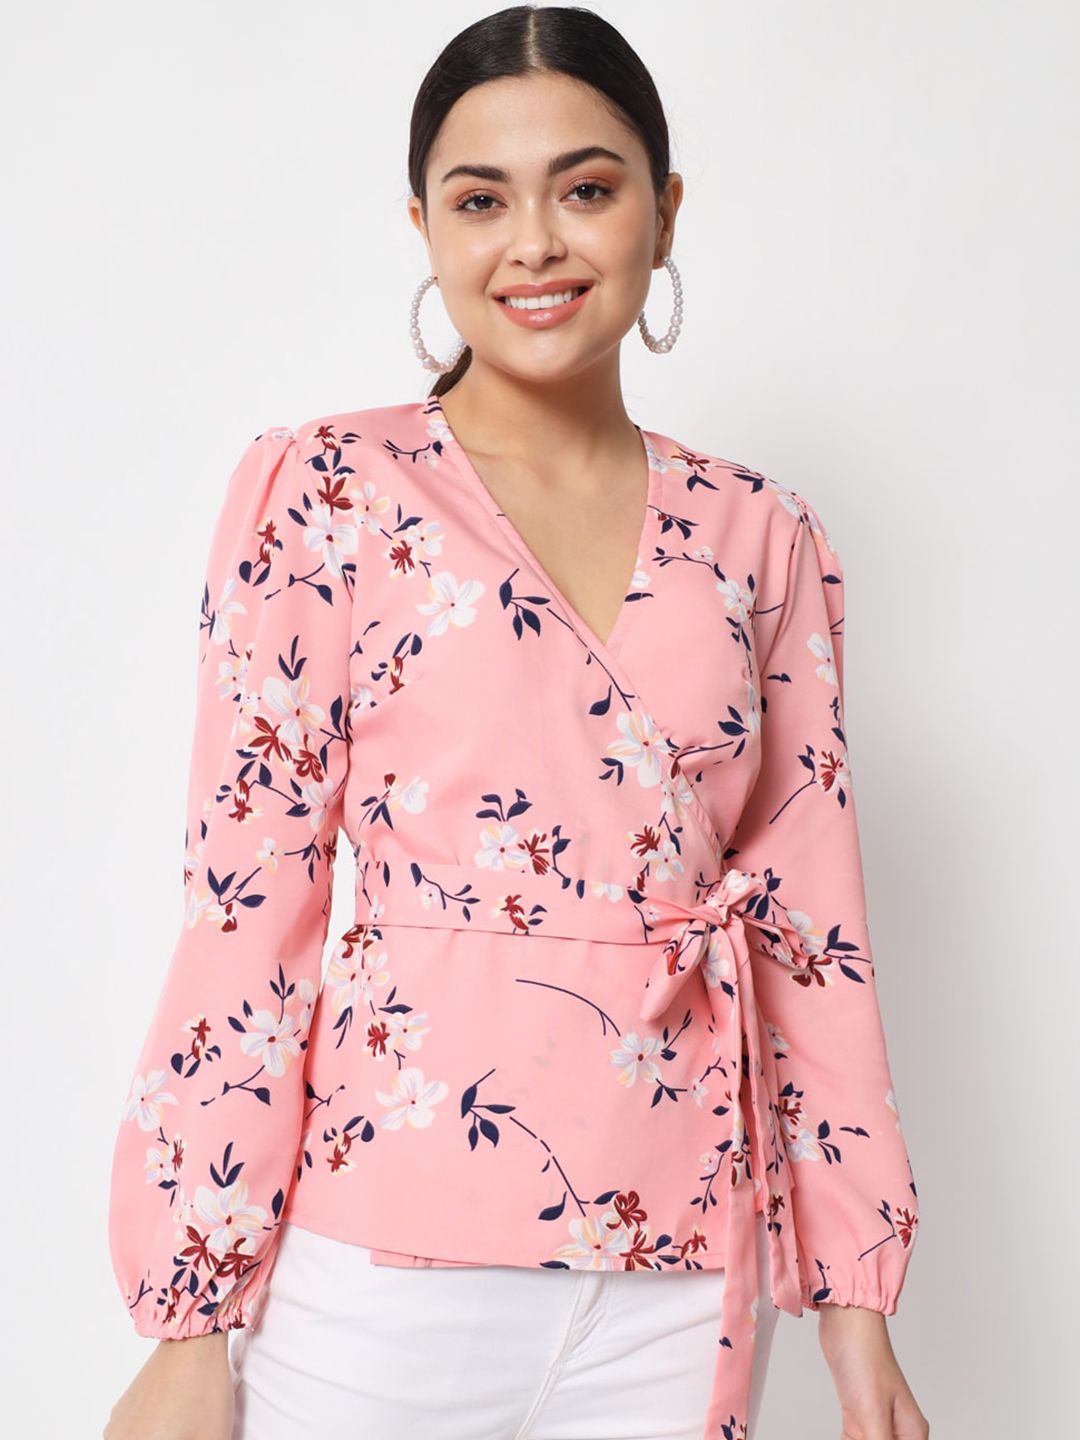 Womenster Pink Floral Print Crepe Wrap Top Price in India